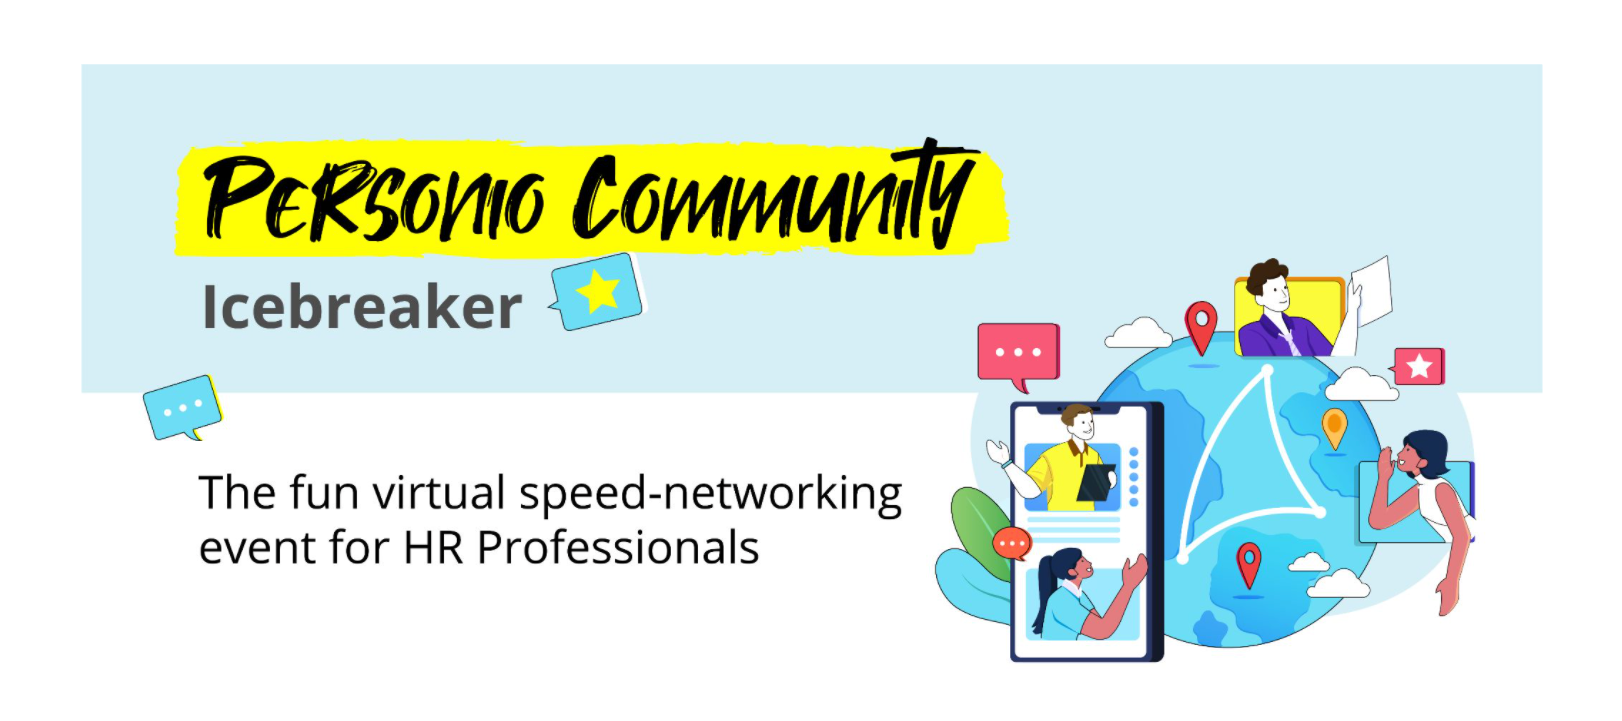 Personio Community Icebreaker: your chance to network with other HR professionals!